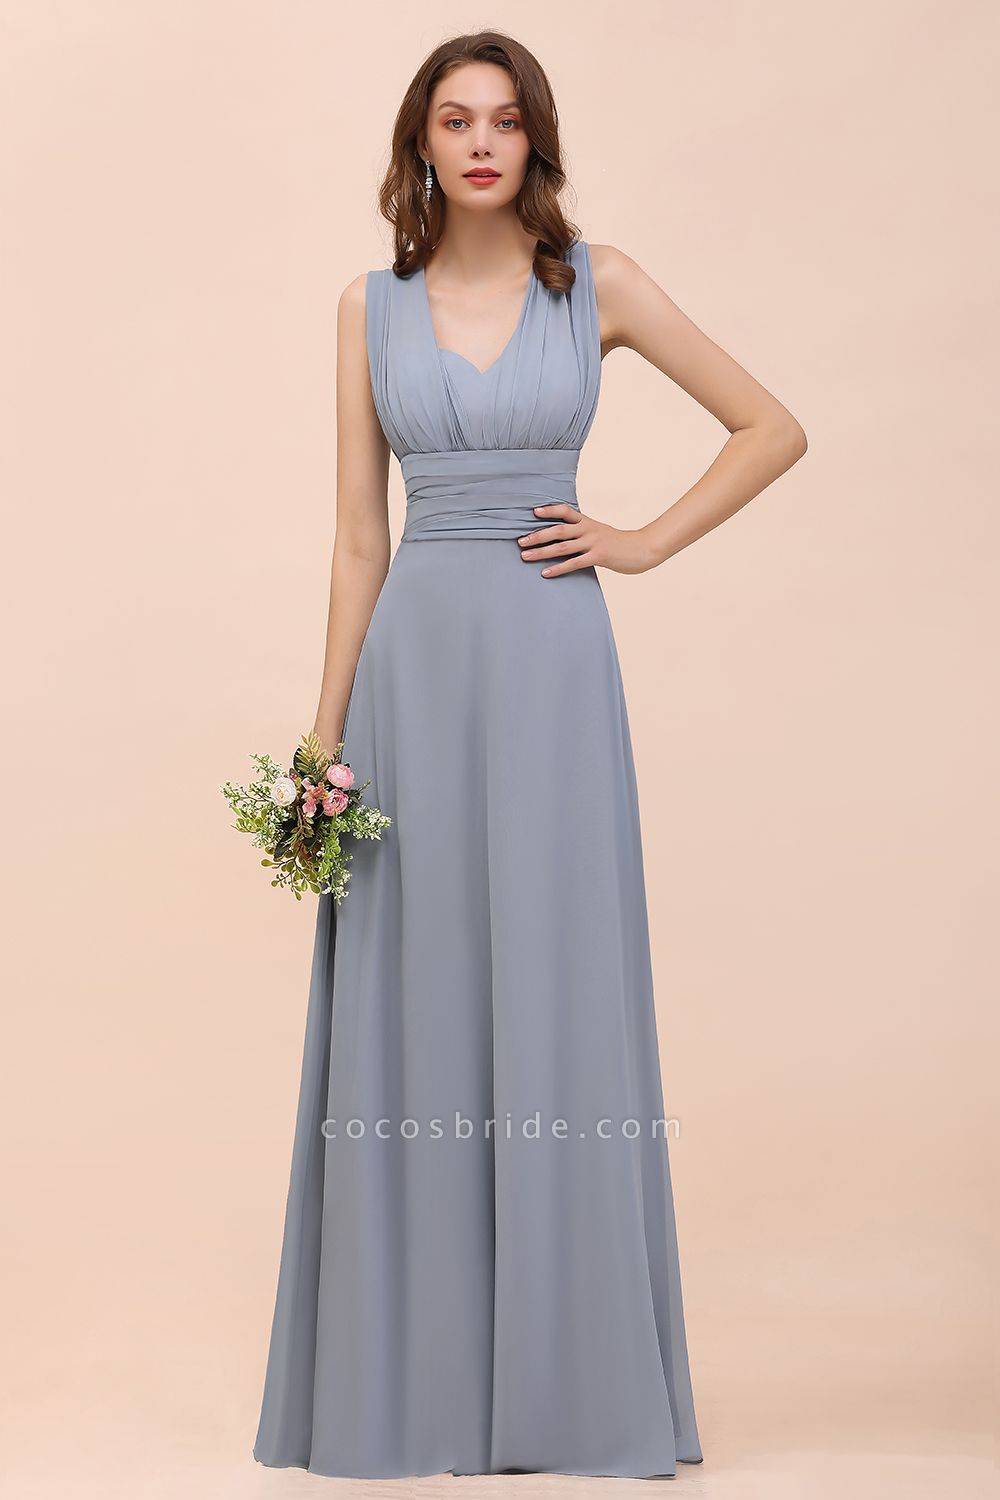 Classy A-Line Wide Straps Floor-length Chiffon Bridesmaid Dresses With Ruched